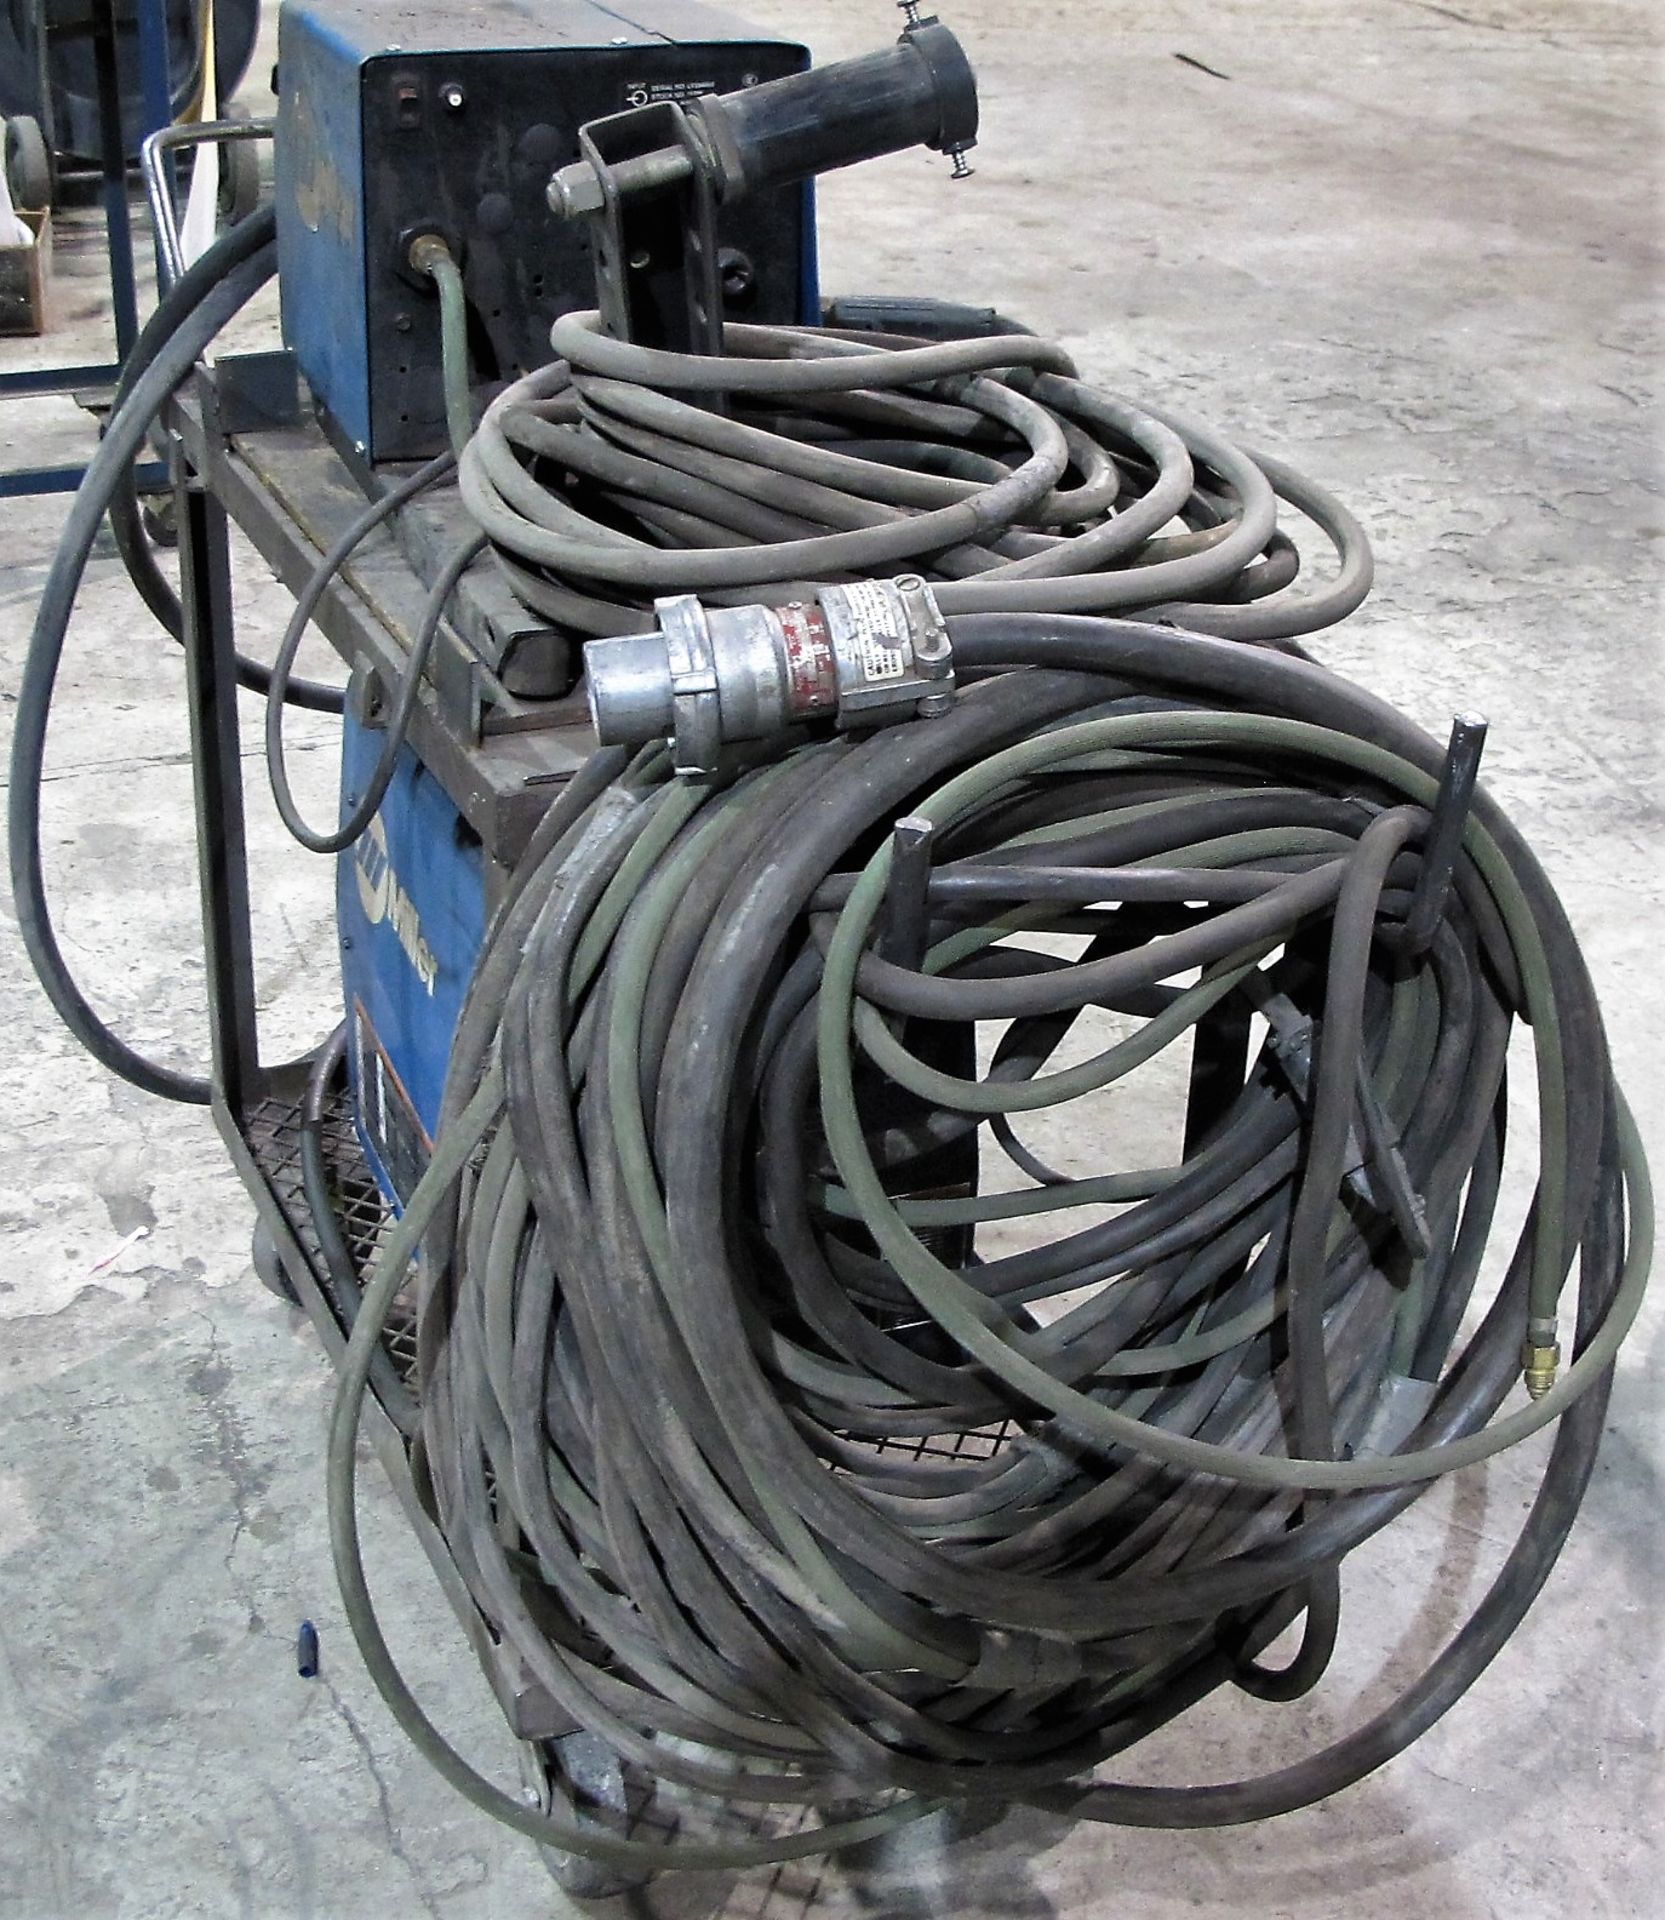 MILLER XMT 350 CC/CW WELDER, S/N LH160462A W/ MILLER 22A WIRE FEEDER, CABLES & CART - Image 4 of 4